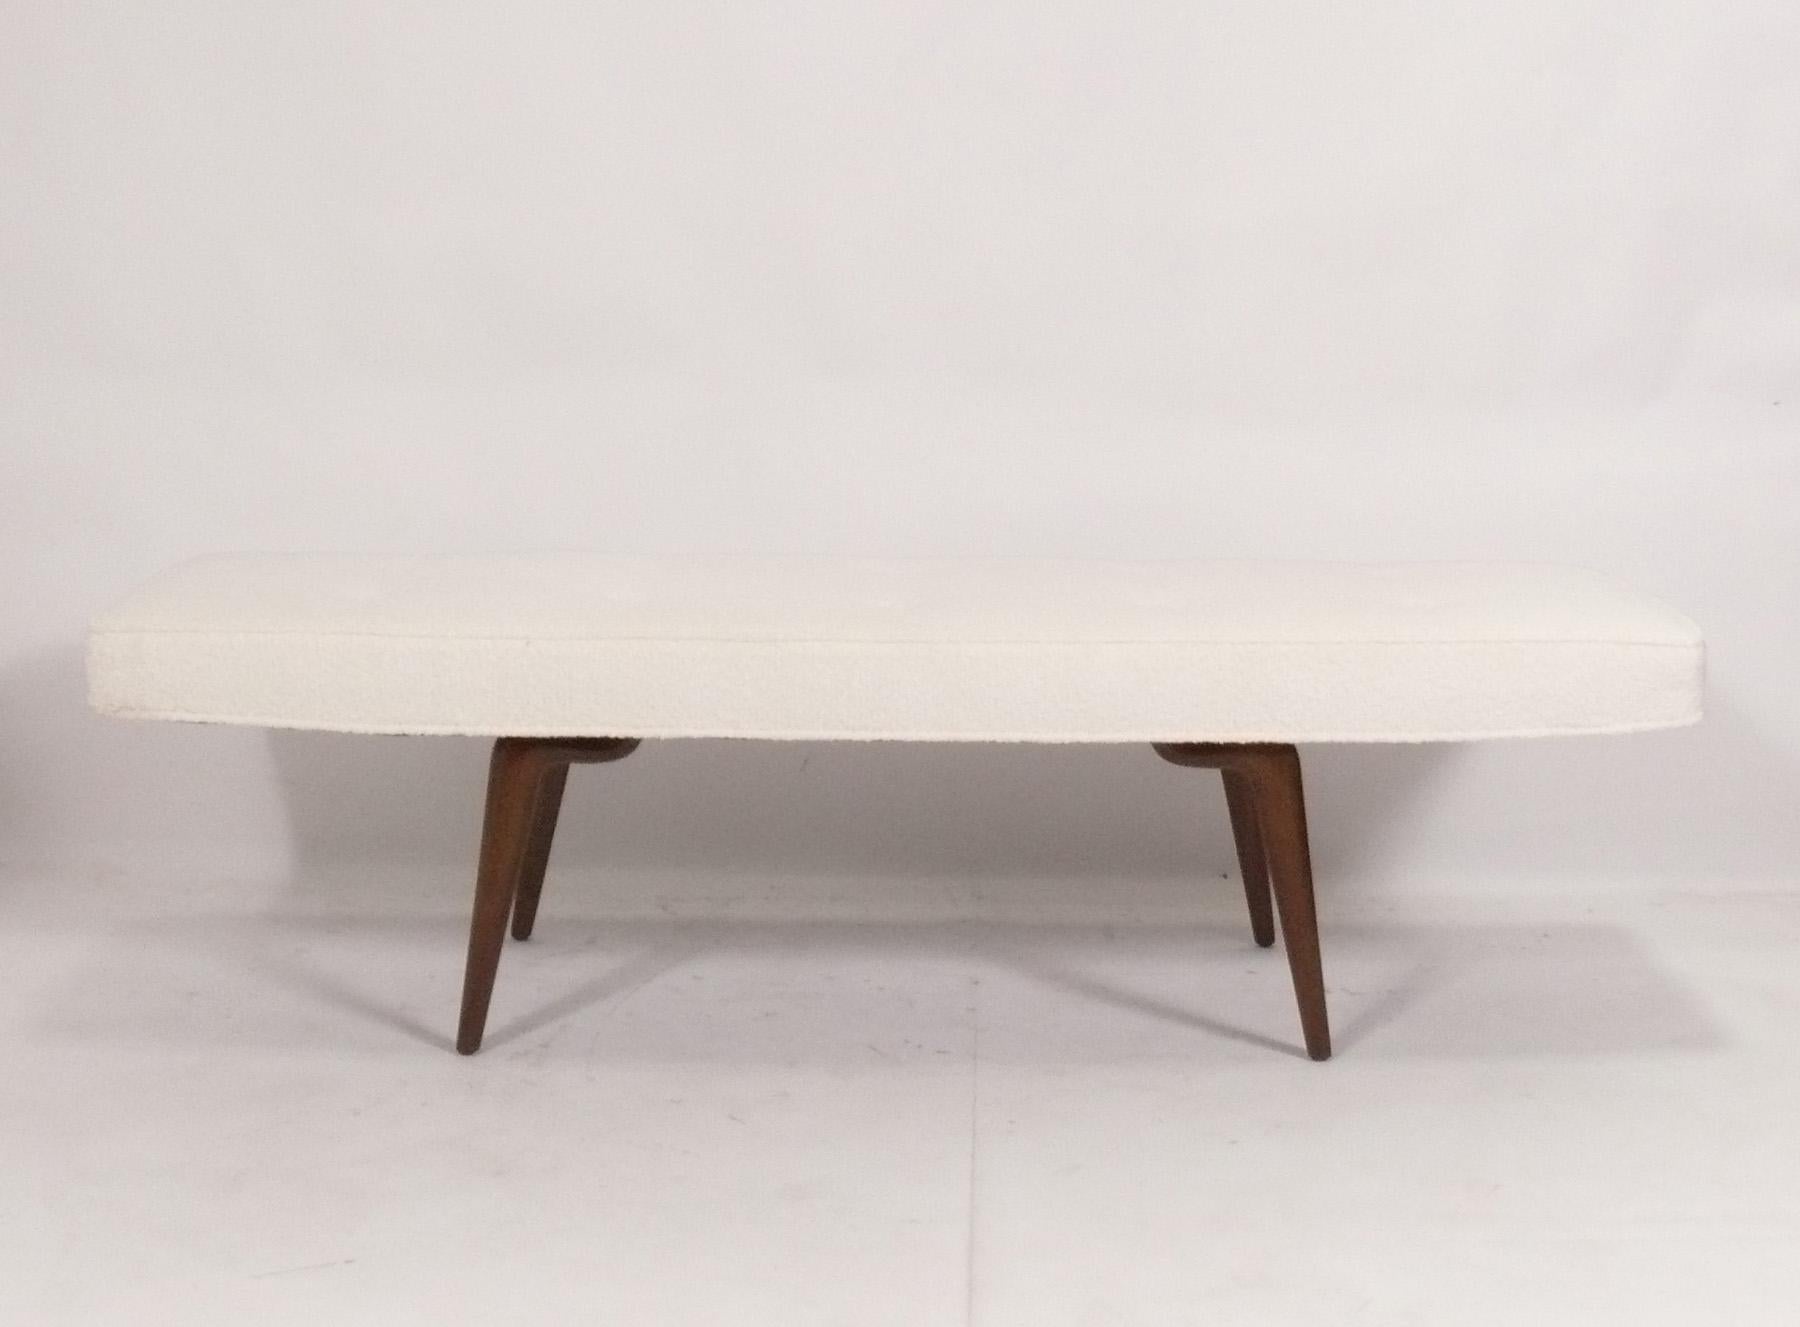 Curvaceous Mid Century Walnut Bench, believed to be Italian, circa 1960s. It has recently been fully restored with the walnut legs refinished and the cushion reupholstered in an ivory color boucle fabric with new foam inside.